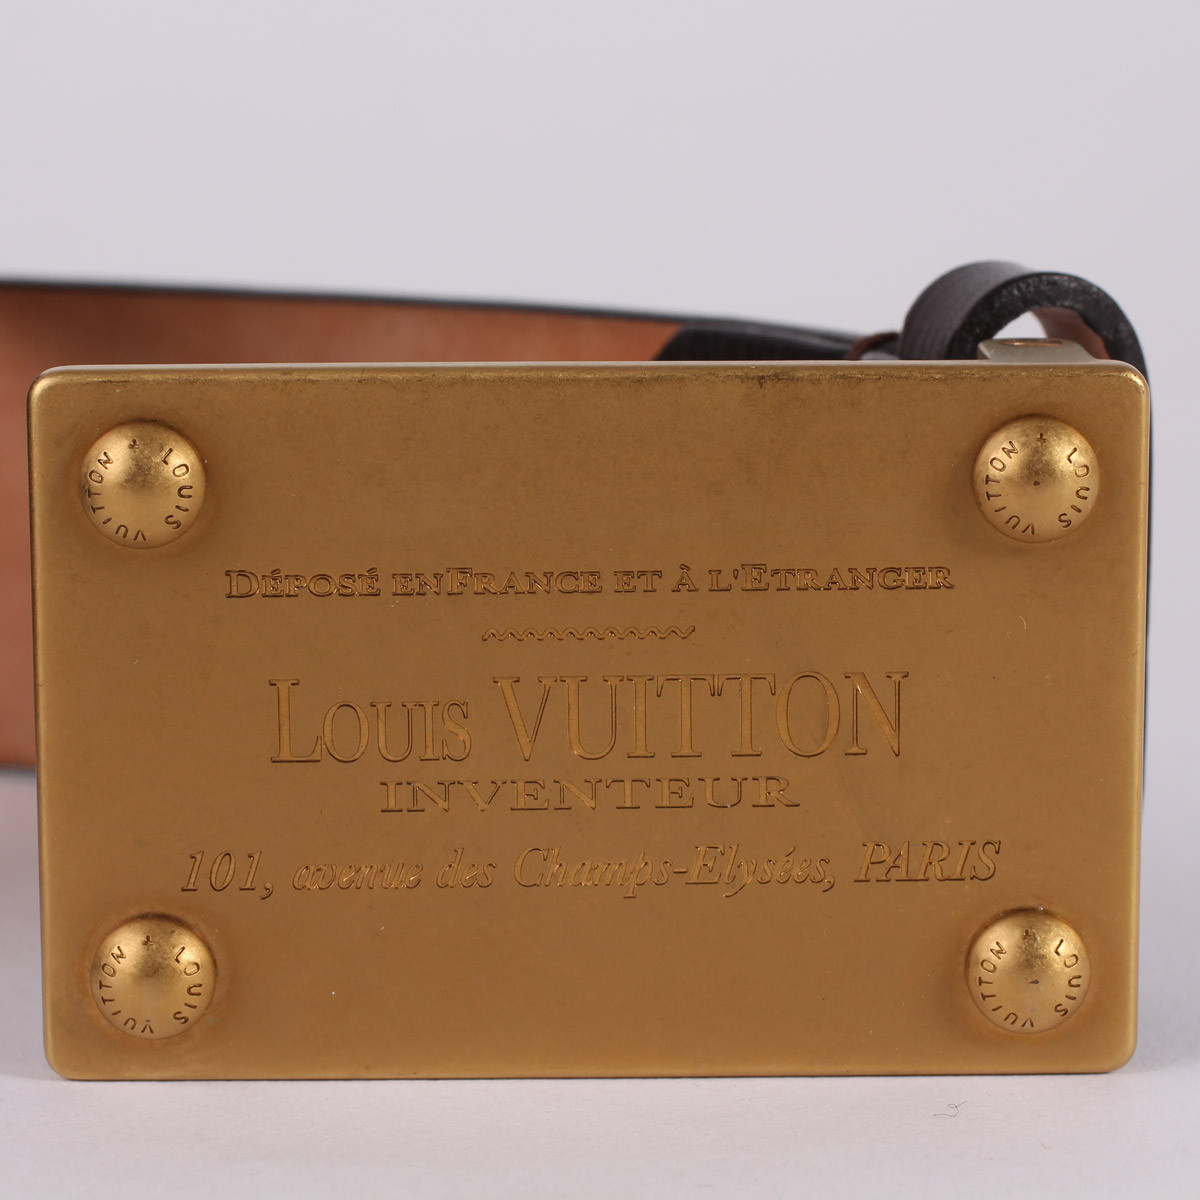 Louis Vuitton was founded by Louis Vuitton Malletier and opened his own  shop at N°4 Rue Neuve des Capucines in Paris, France